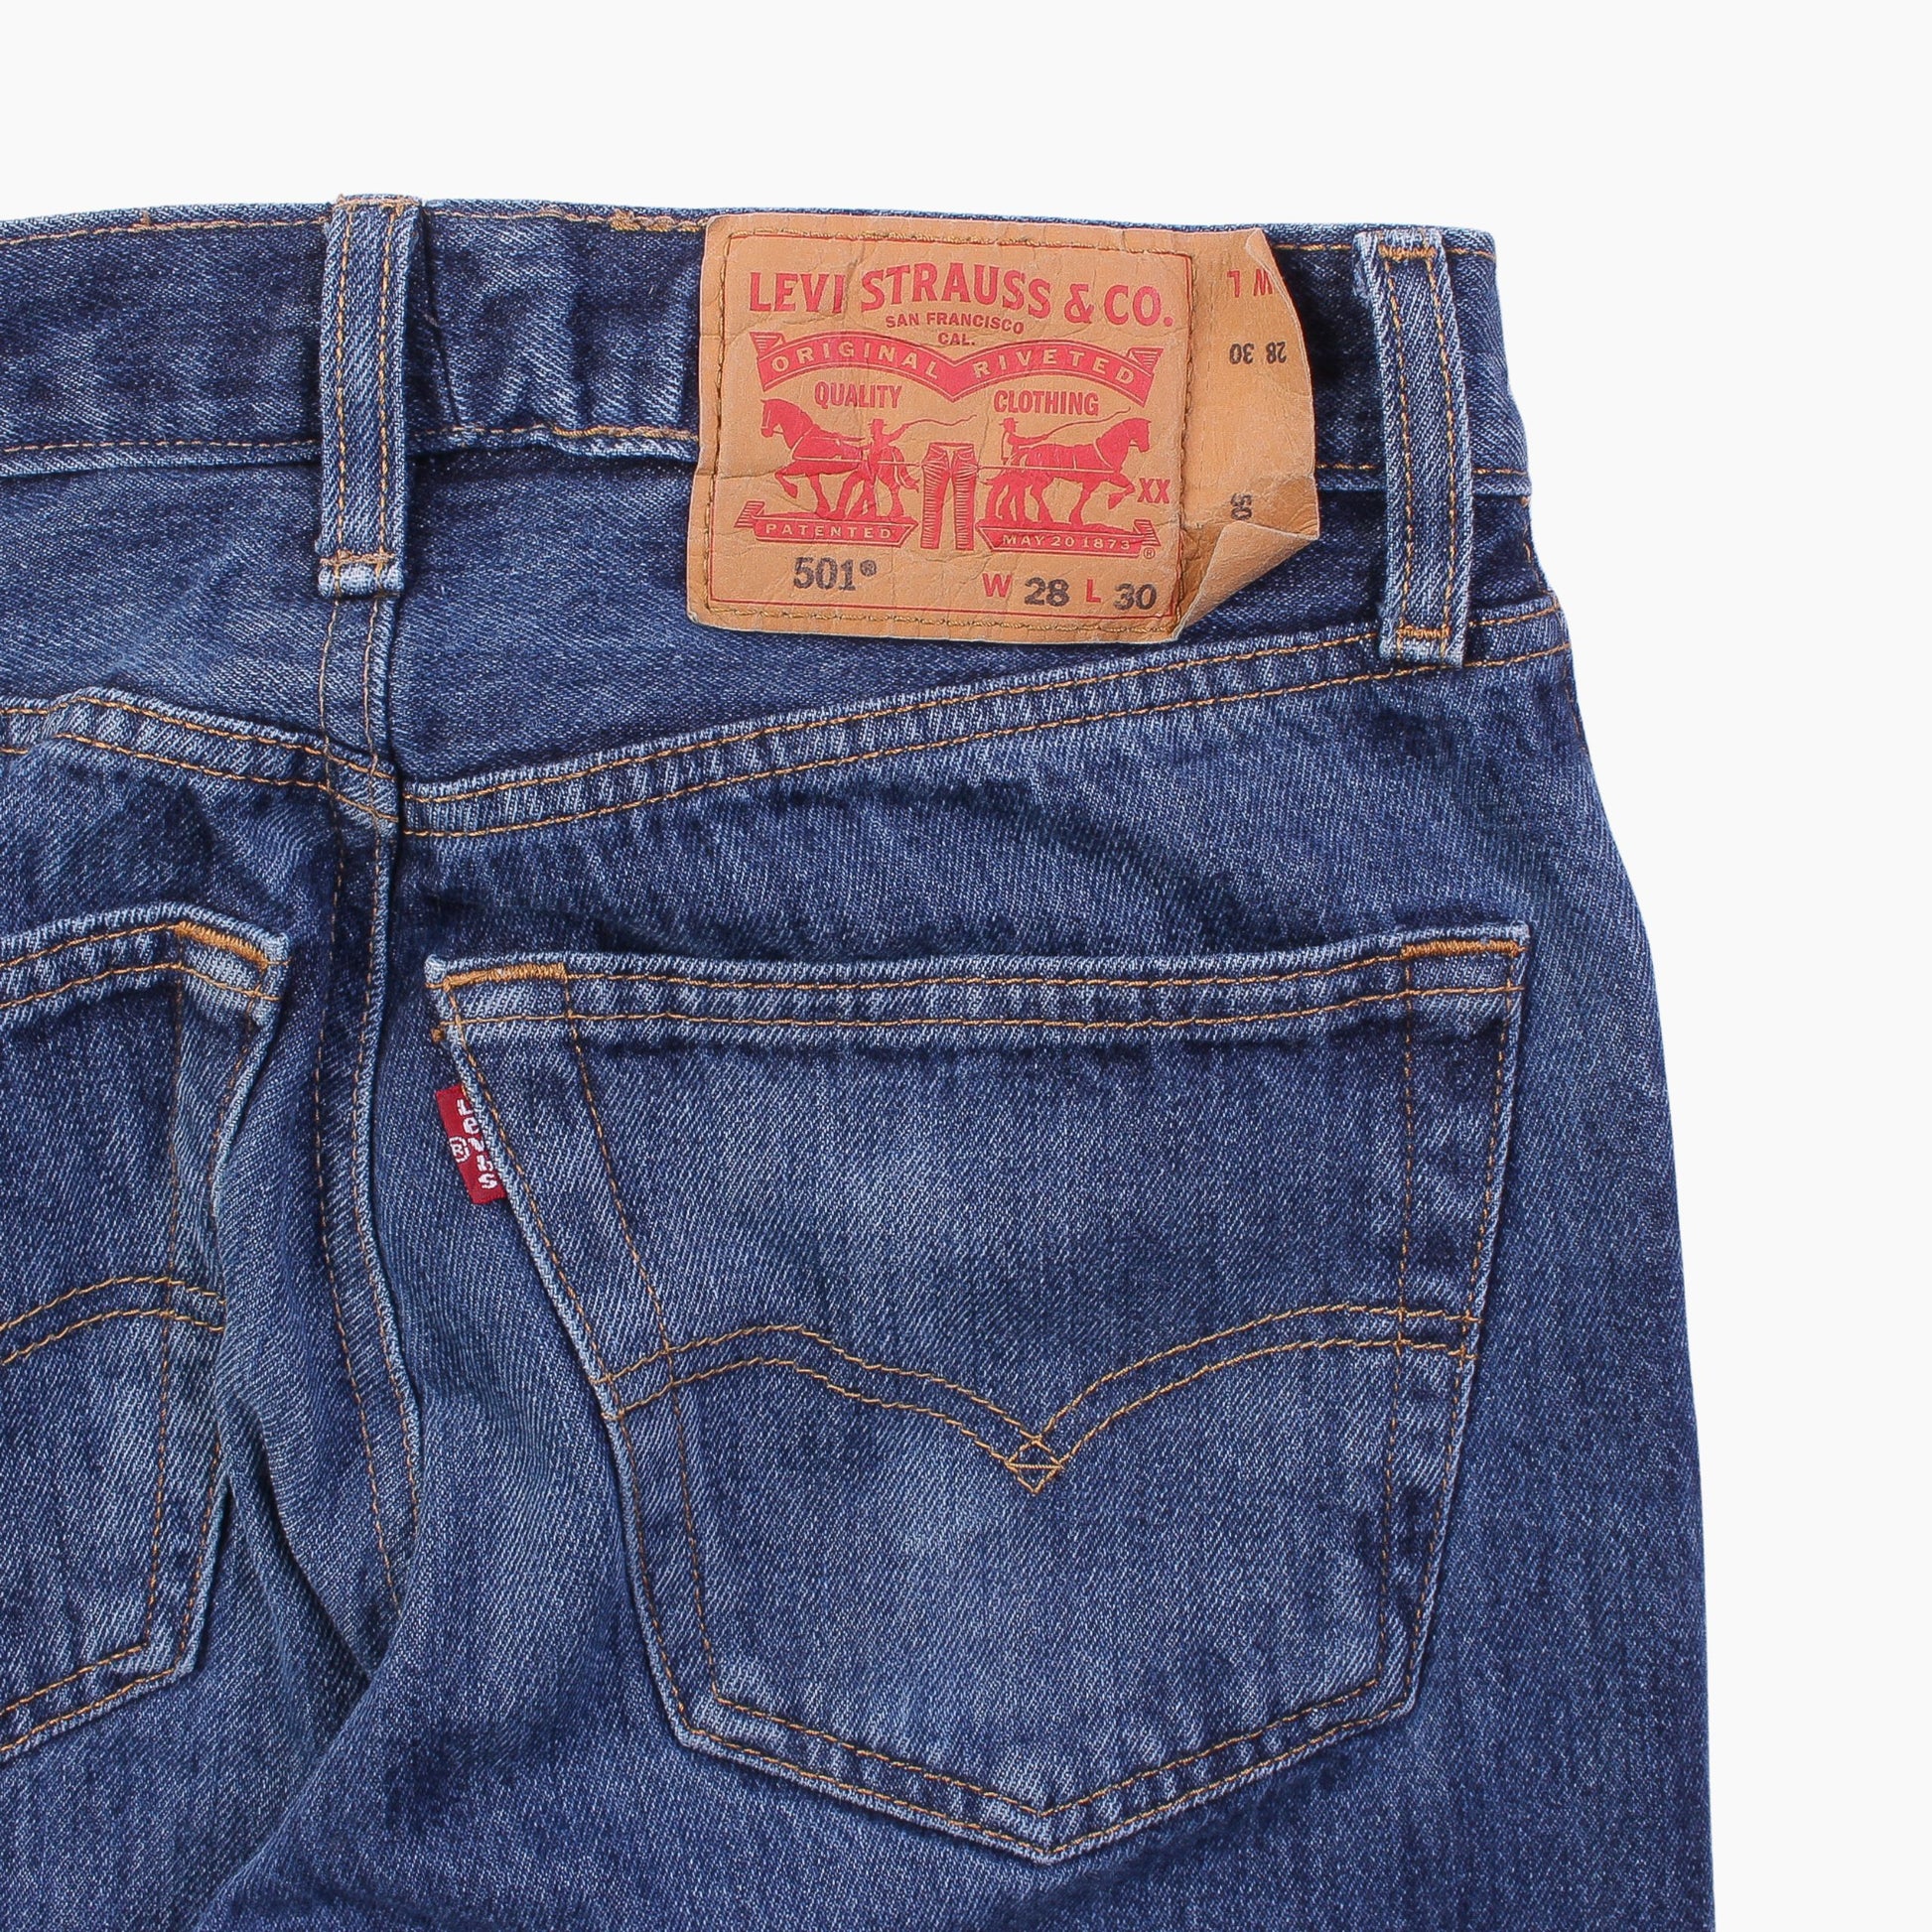 Vintage 501 Jeans - 28" 30" - American Madness